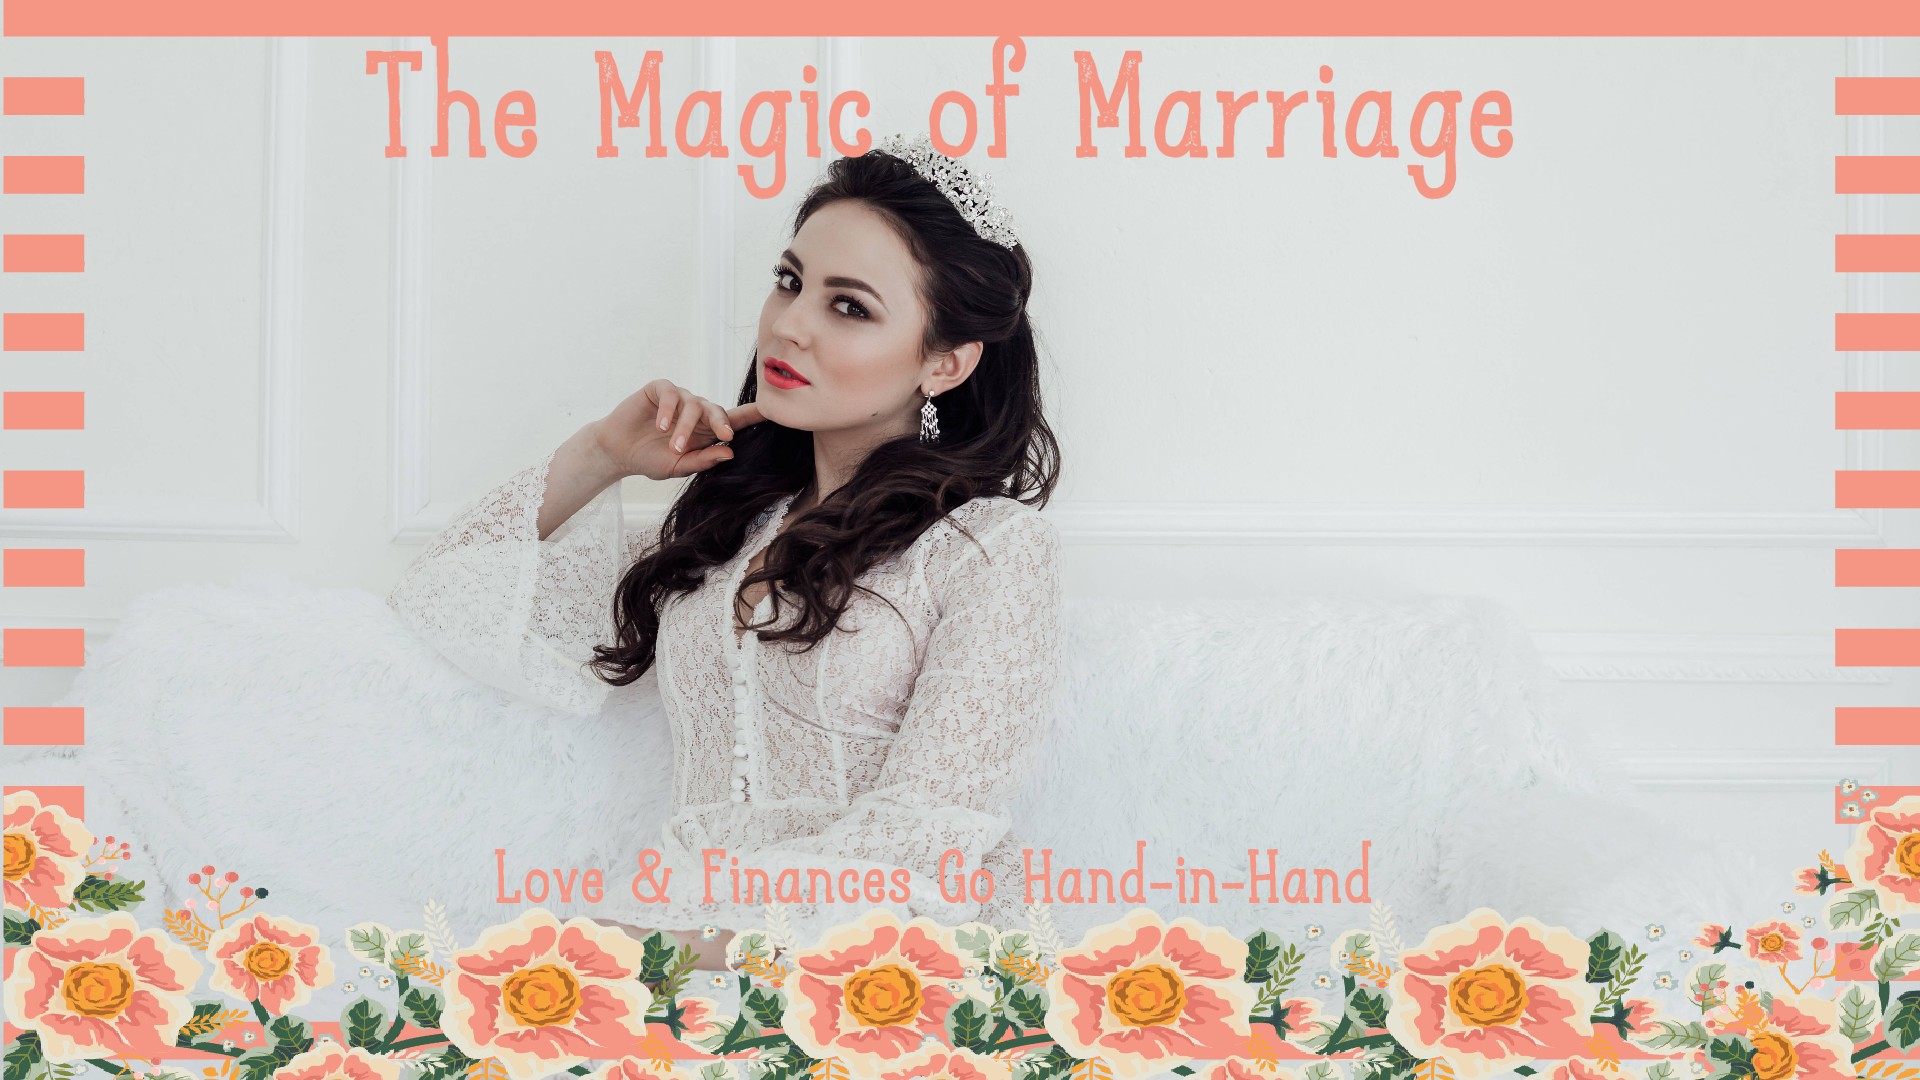 The Magic of Marriage: Love & Finances Go Hand-in-Hand